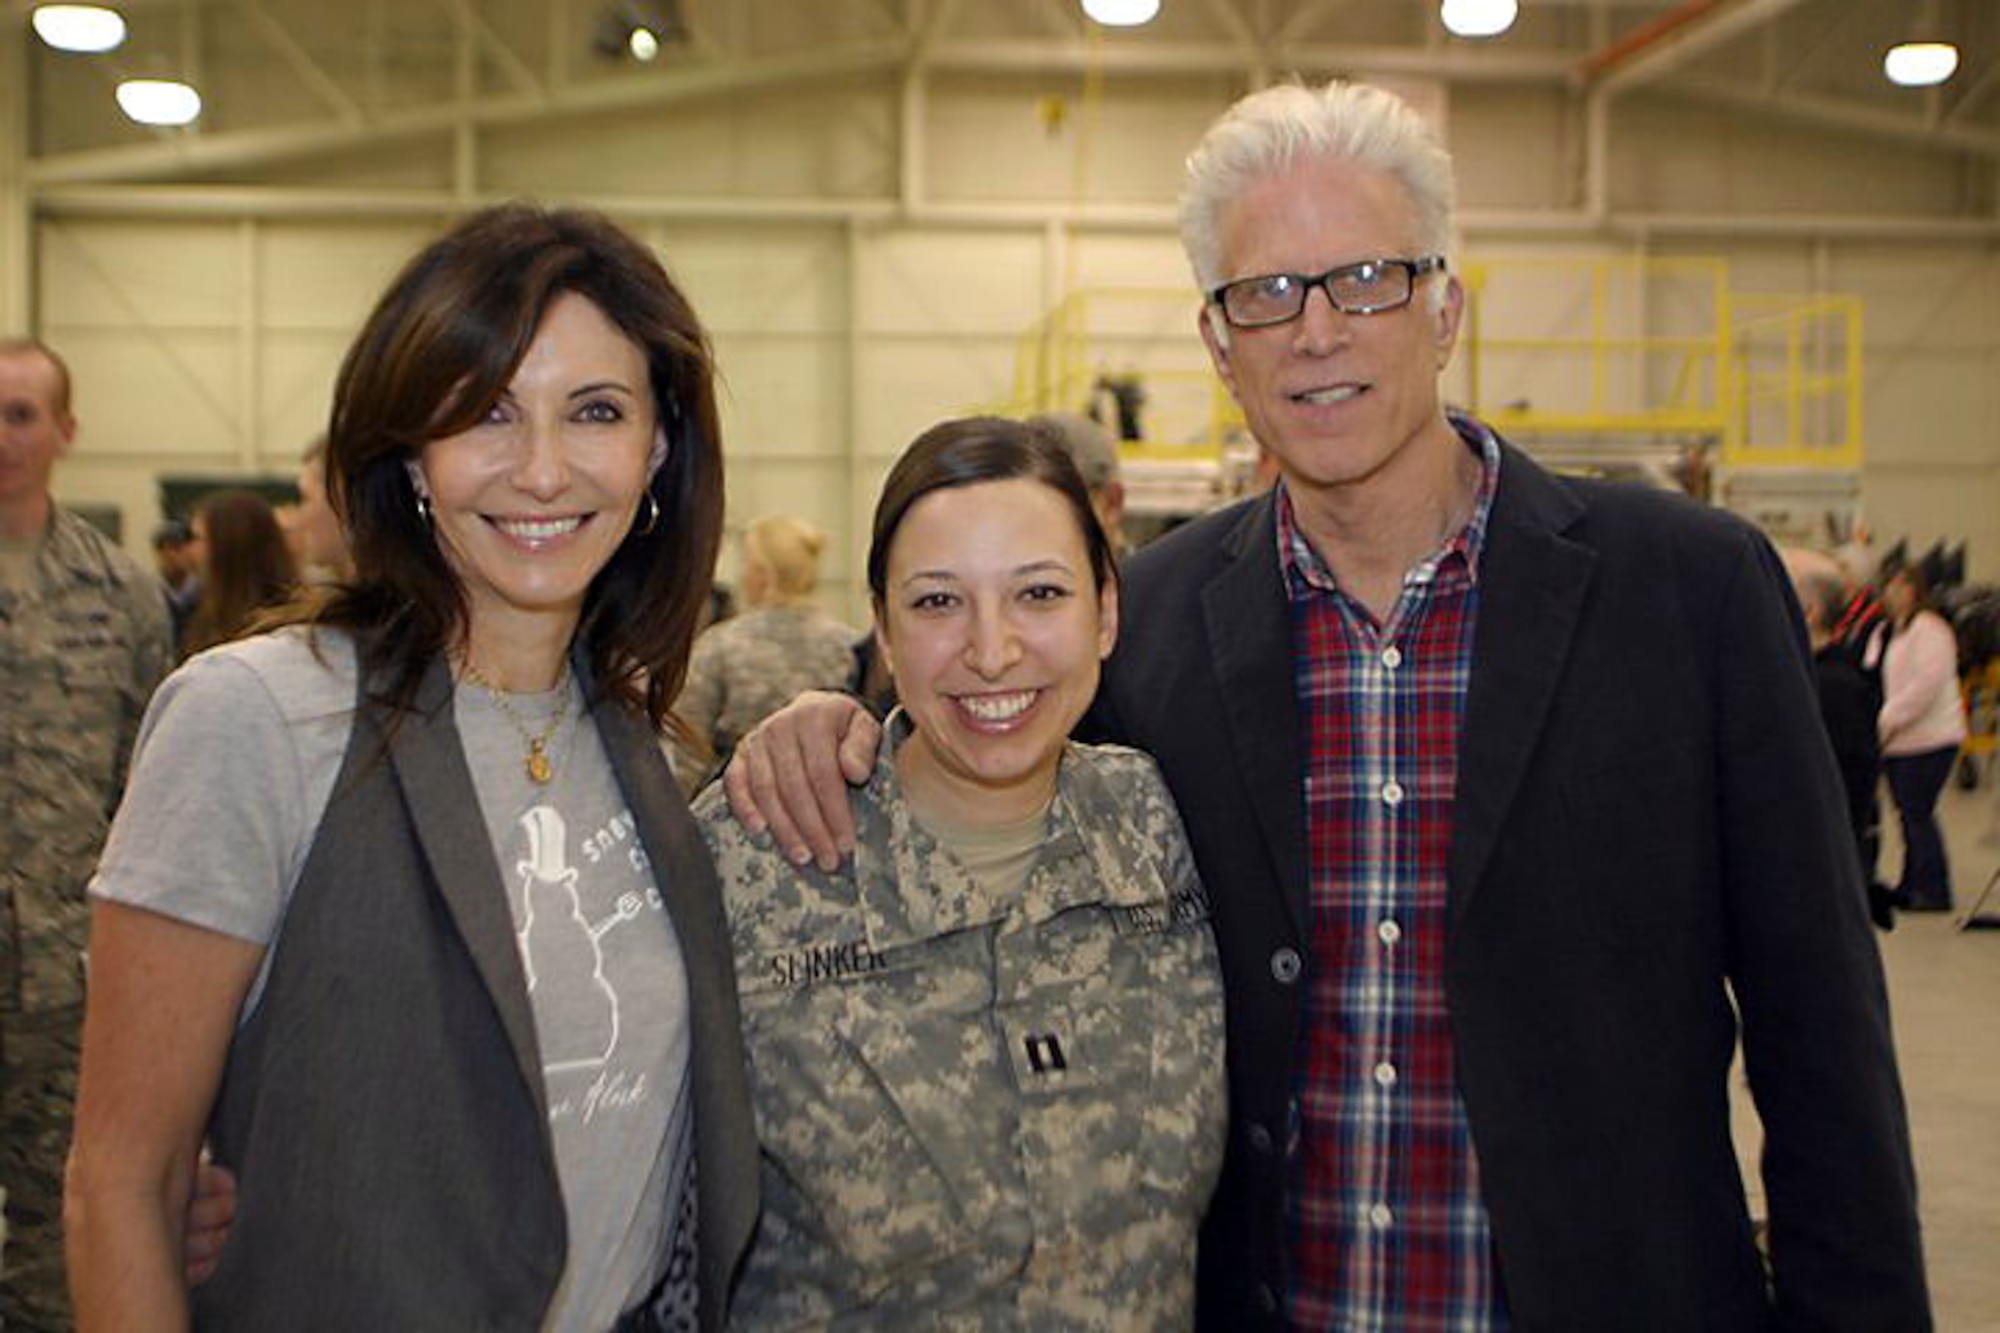 JOINT BASE ELMENDORF RICHARDSON, Alaska -- Capt. Amy Slinker, commander of the Alaska Army National Guard's 134th Public Affairs Detachmen, poses for a photo with Mary Steenburgen and Ted Danson during a meet and greet event held Nov. 6. Photo by Maj. Guy Hayes, Alaska National Guard Public Affairs Office.